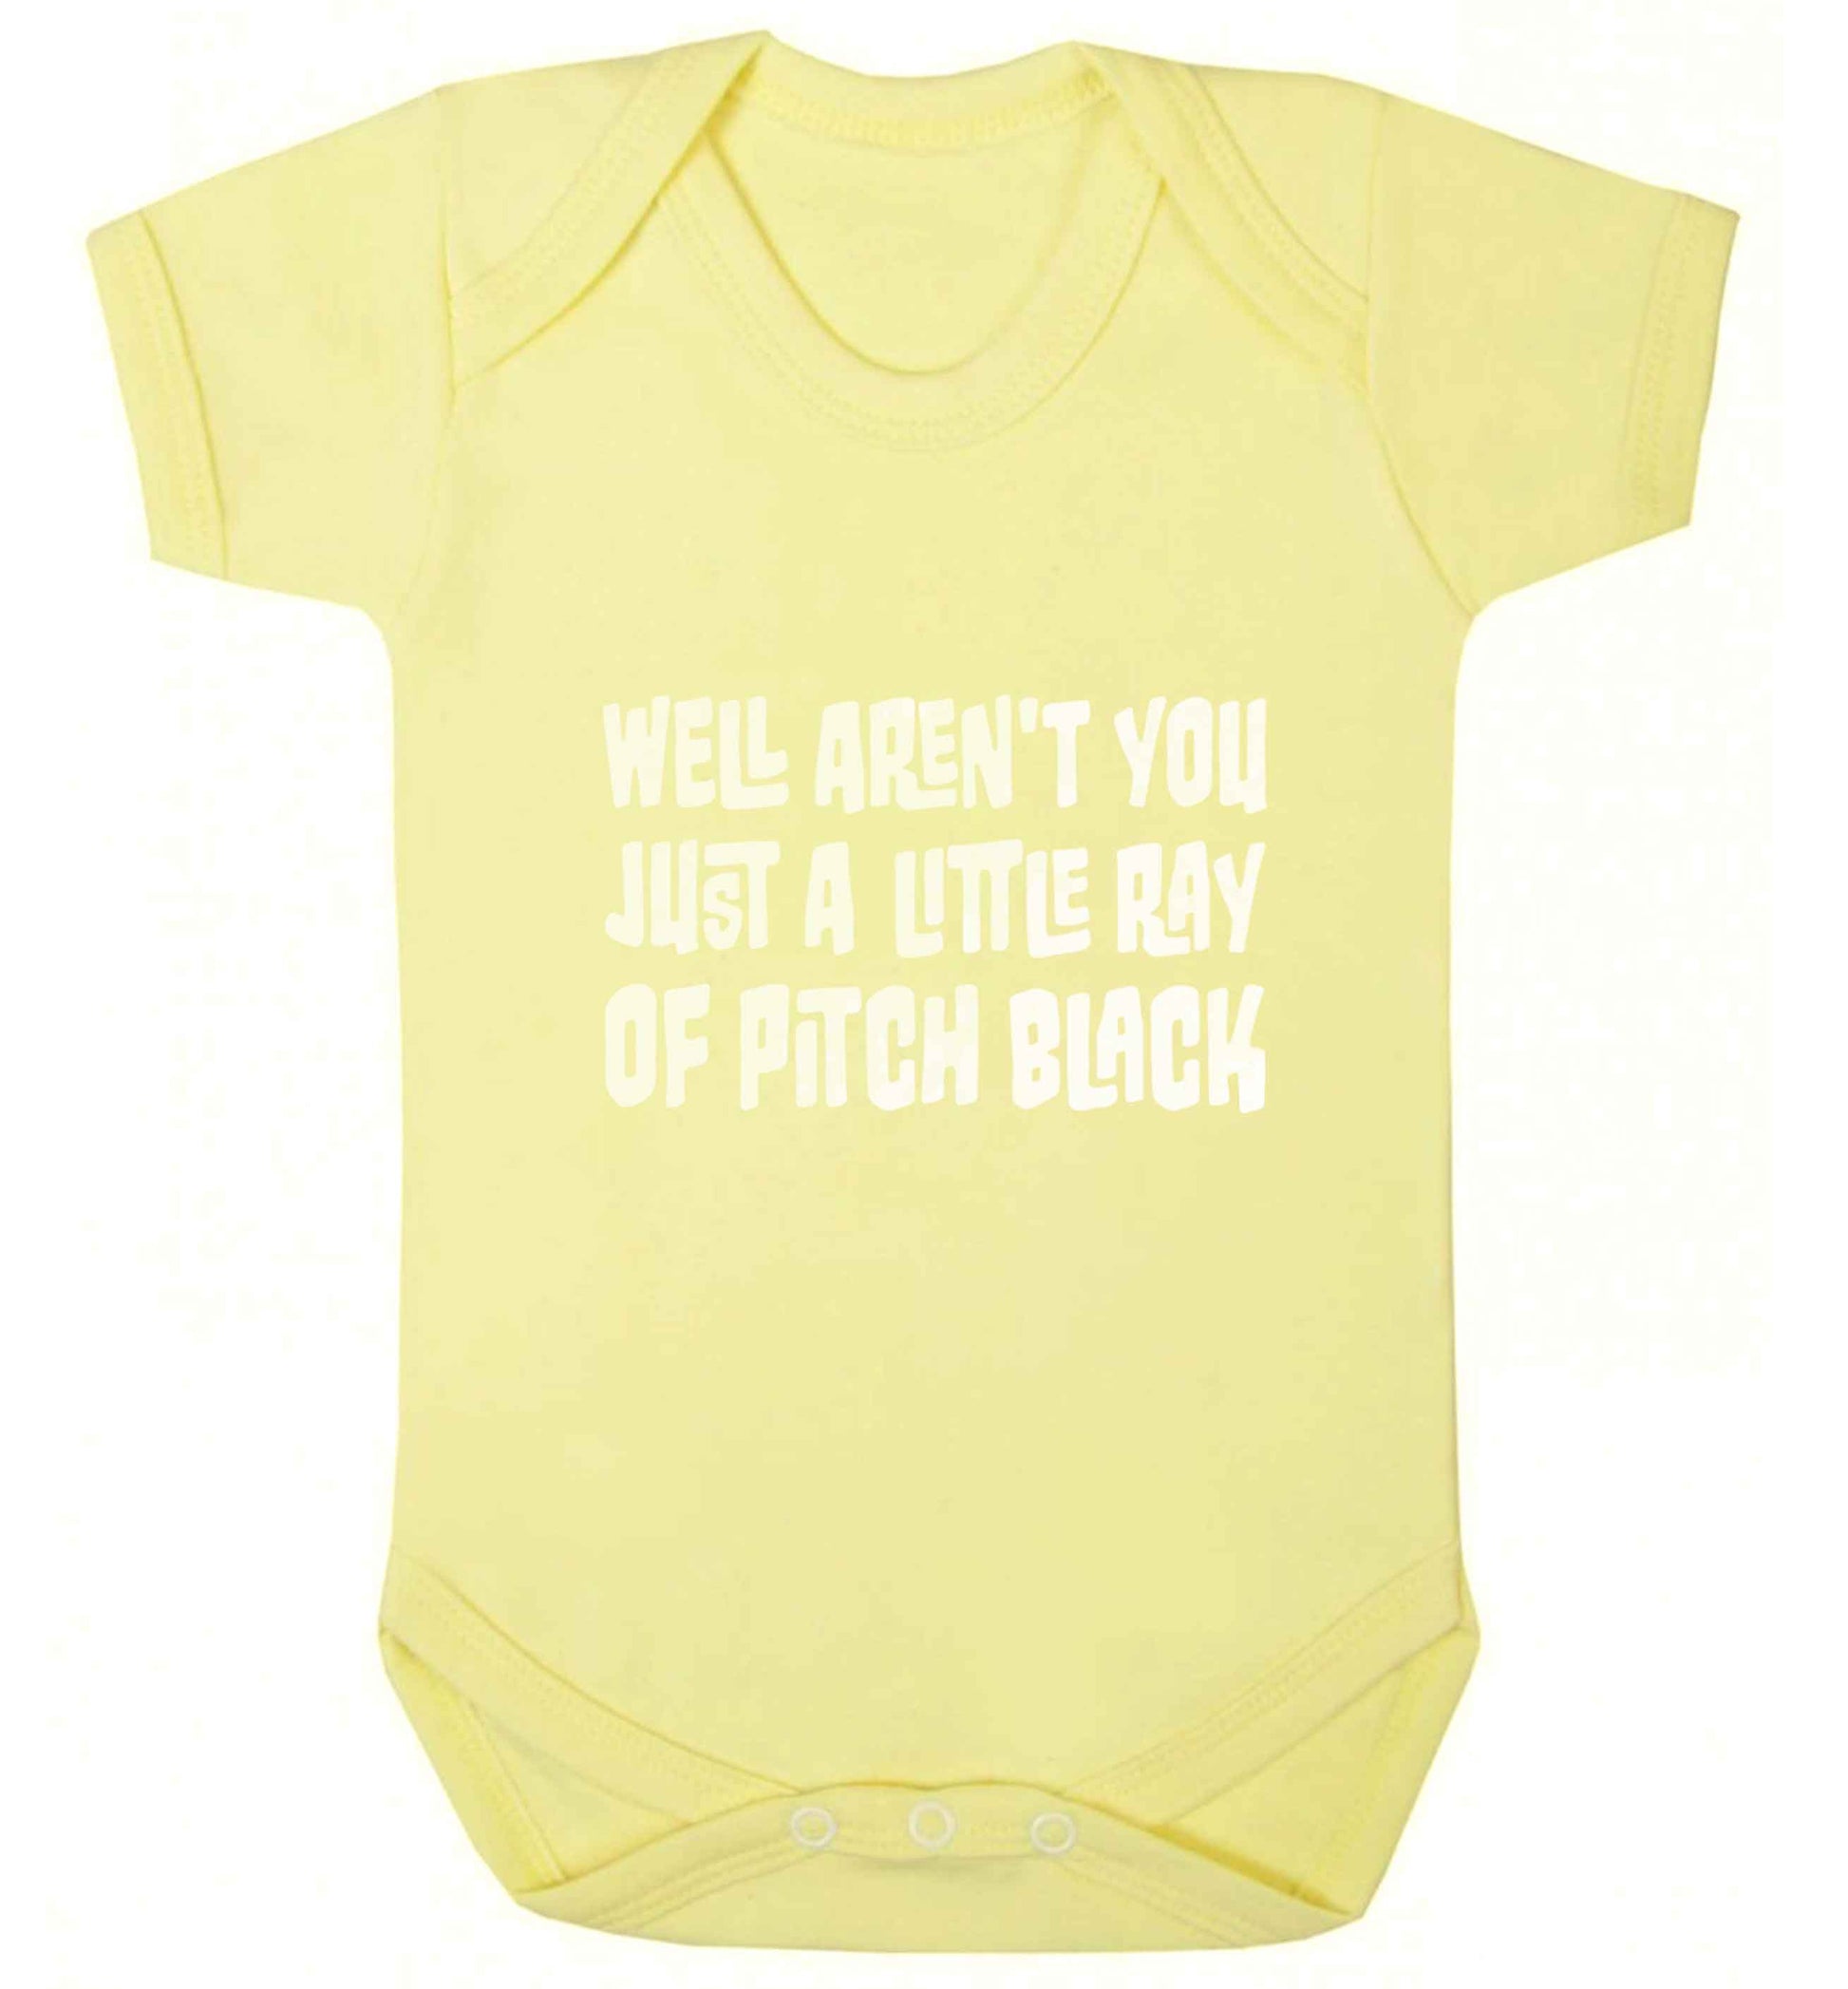 Well aren't you just a little ray of pitch black Kit baby vest pale yellow 18-24 months